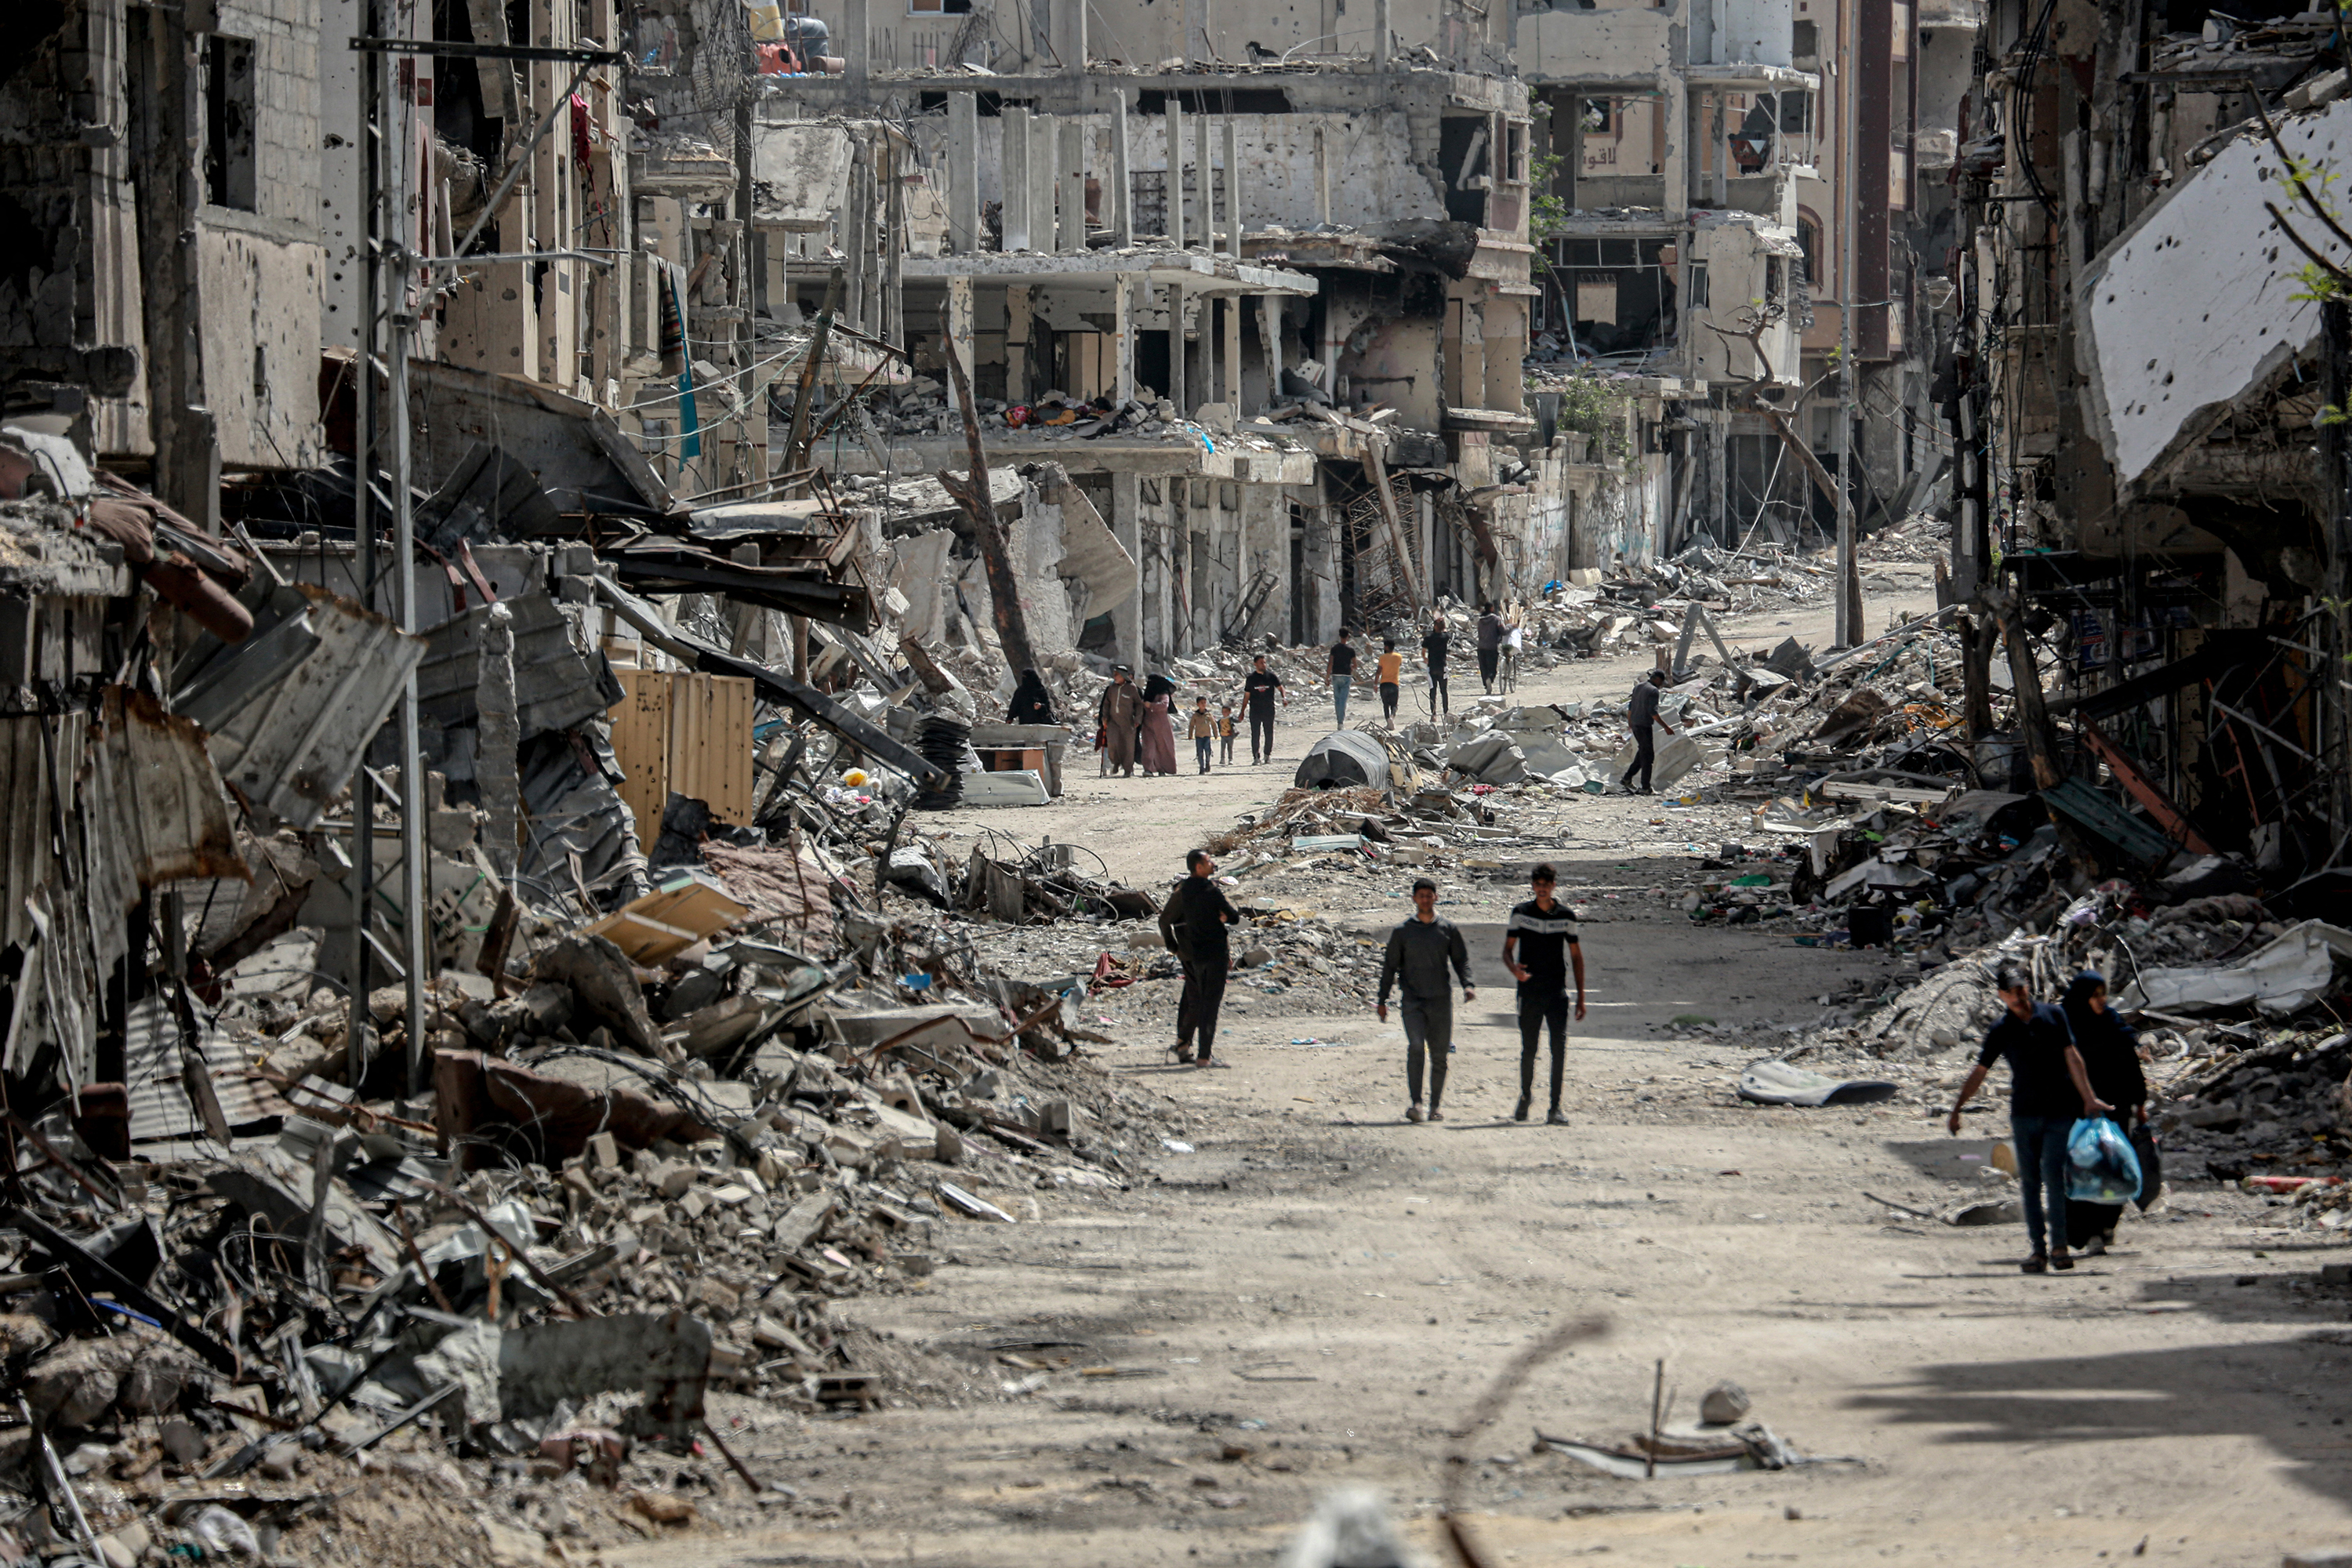 Palestinians walk on a road lined with destroyed buildings in Khan Younis, Gaza, on April 22.